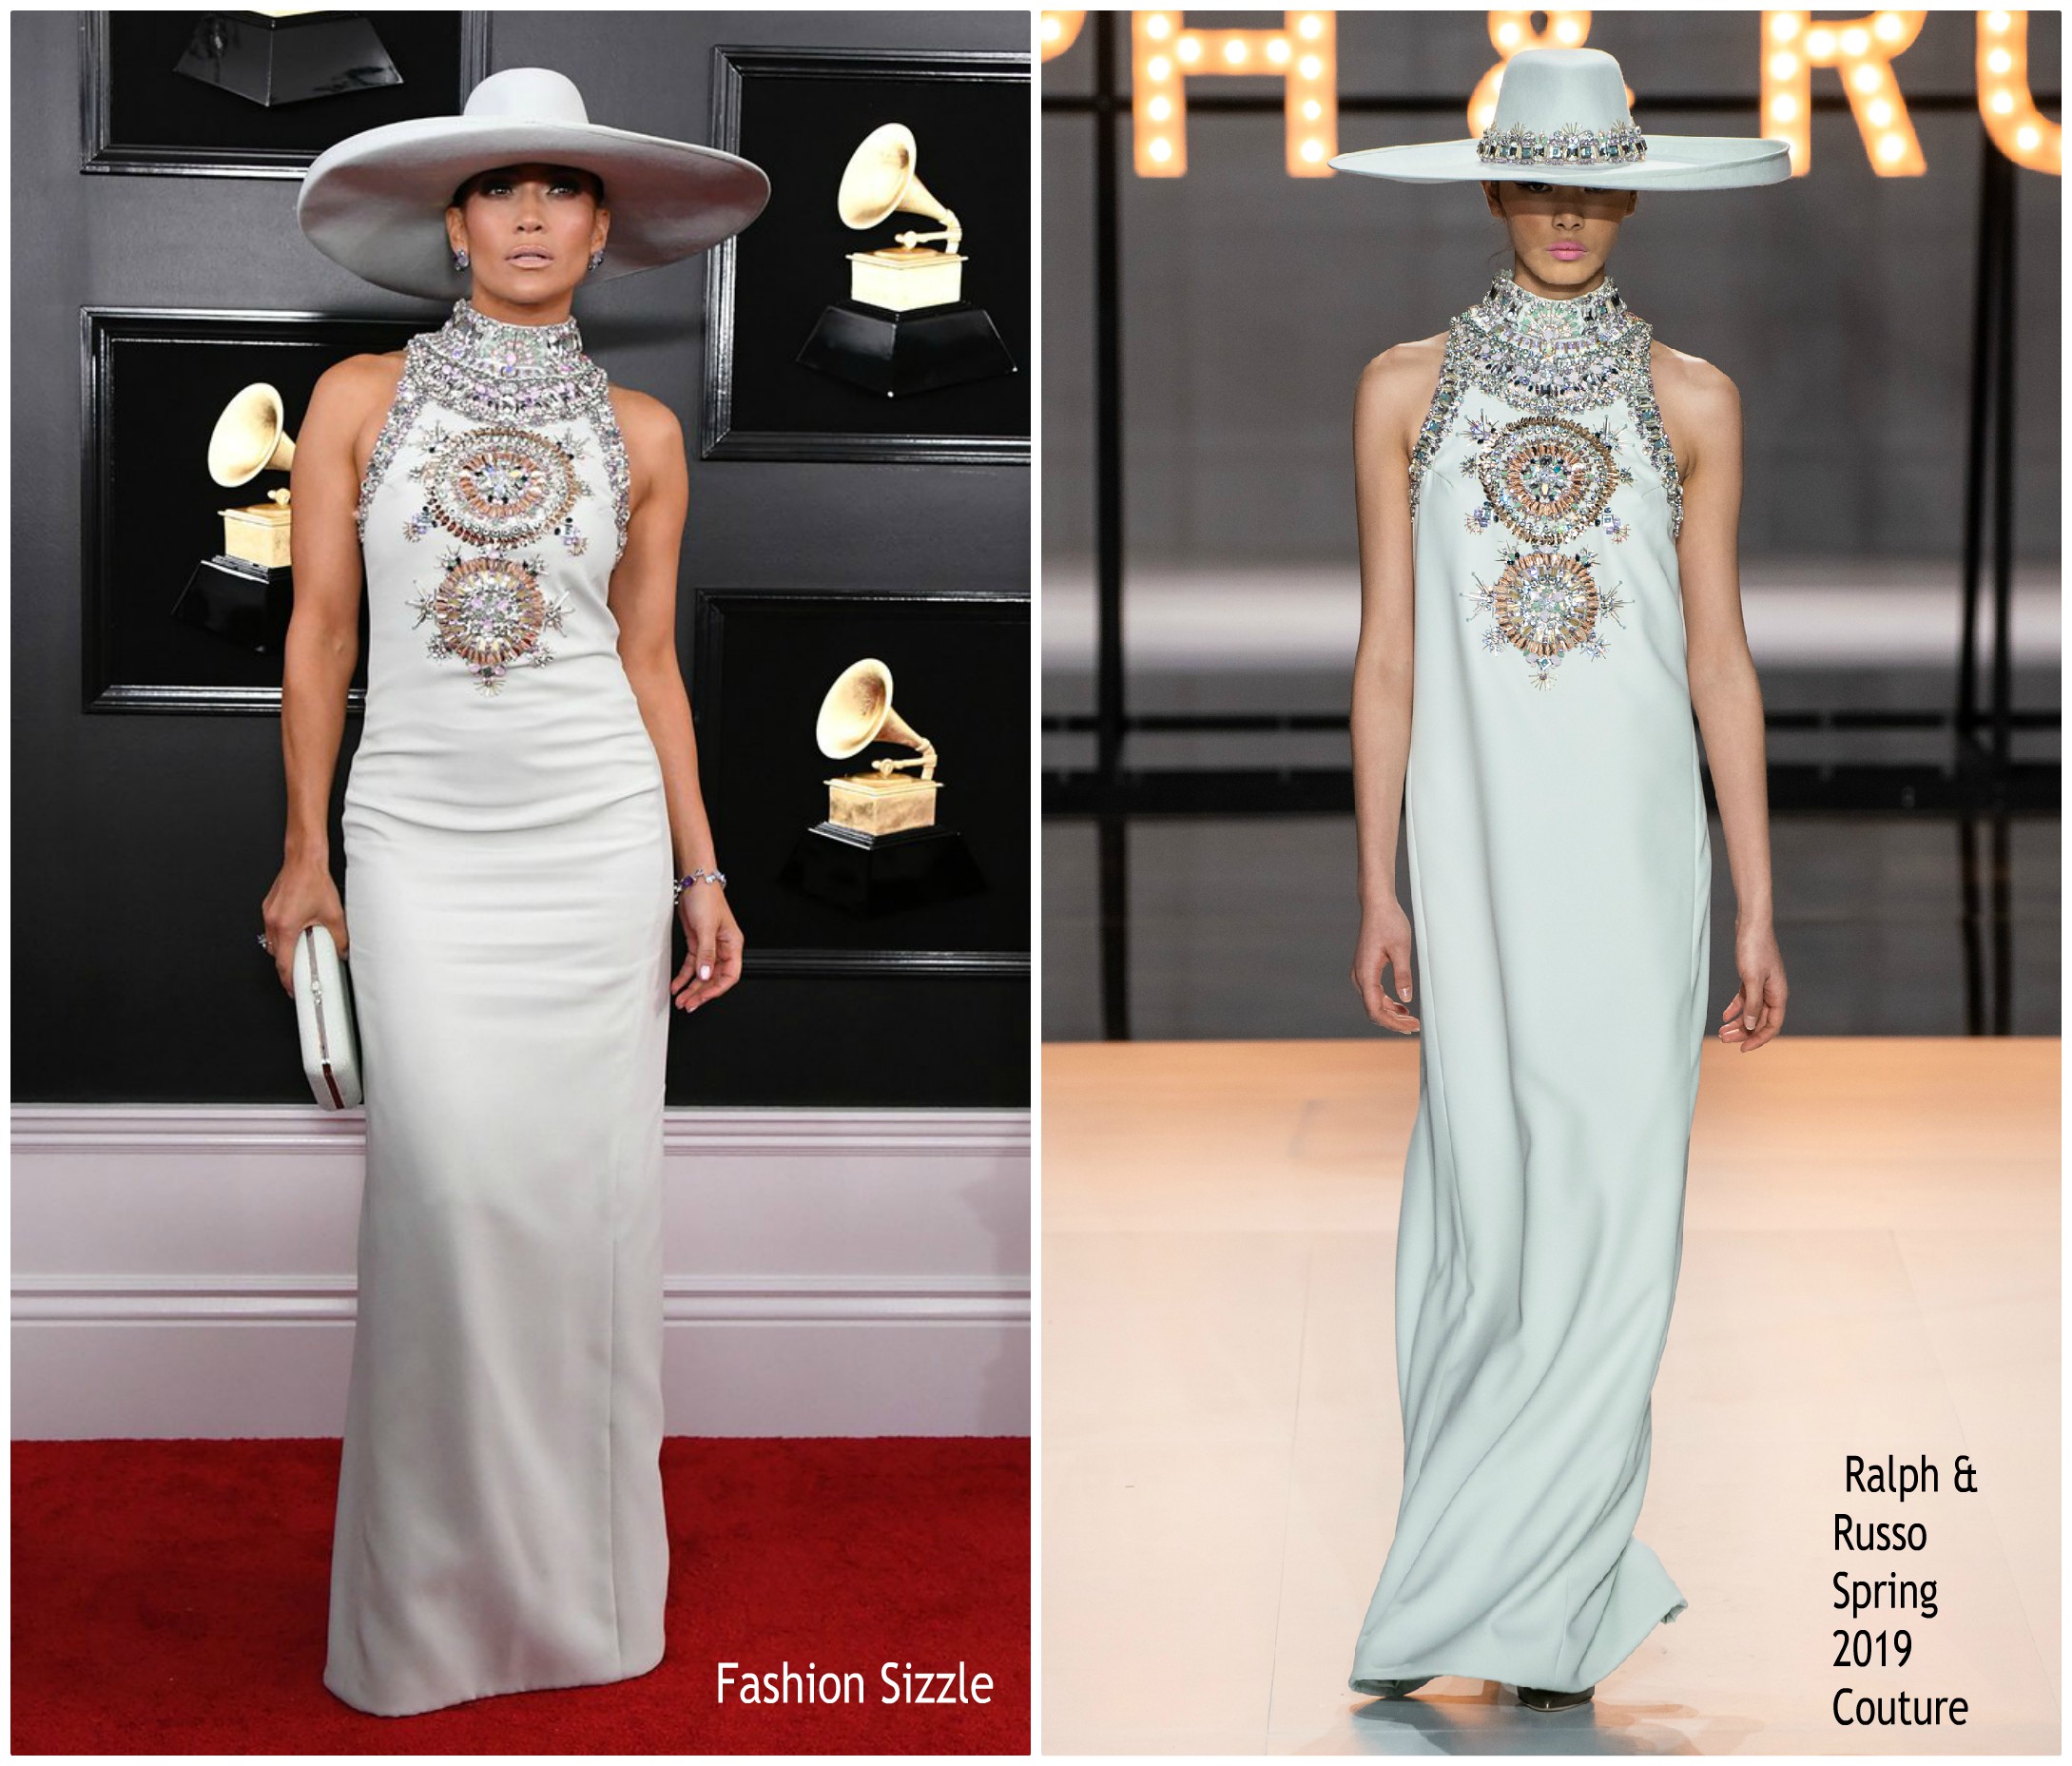 Jennifer Lopez In Ralph & Russo Couture @ 2019 Grammy Awards